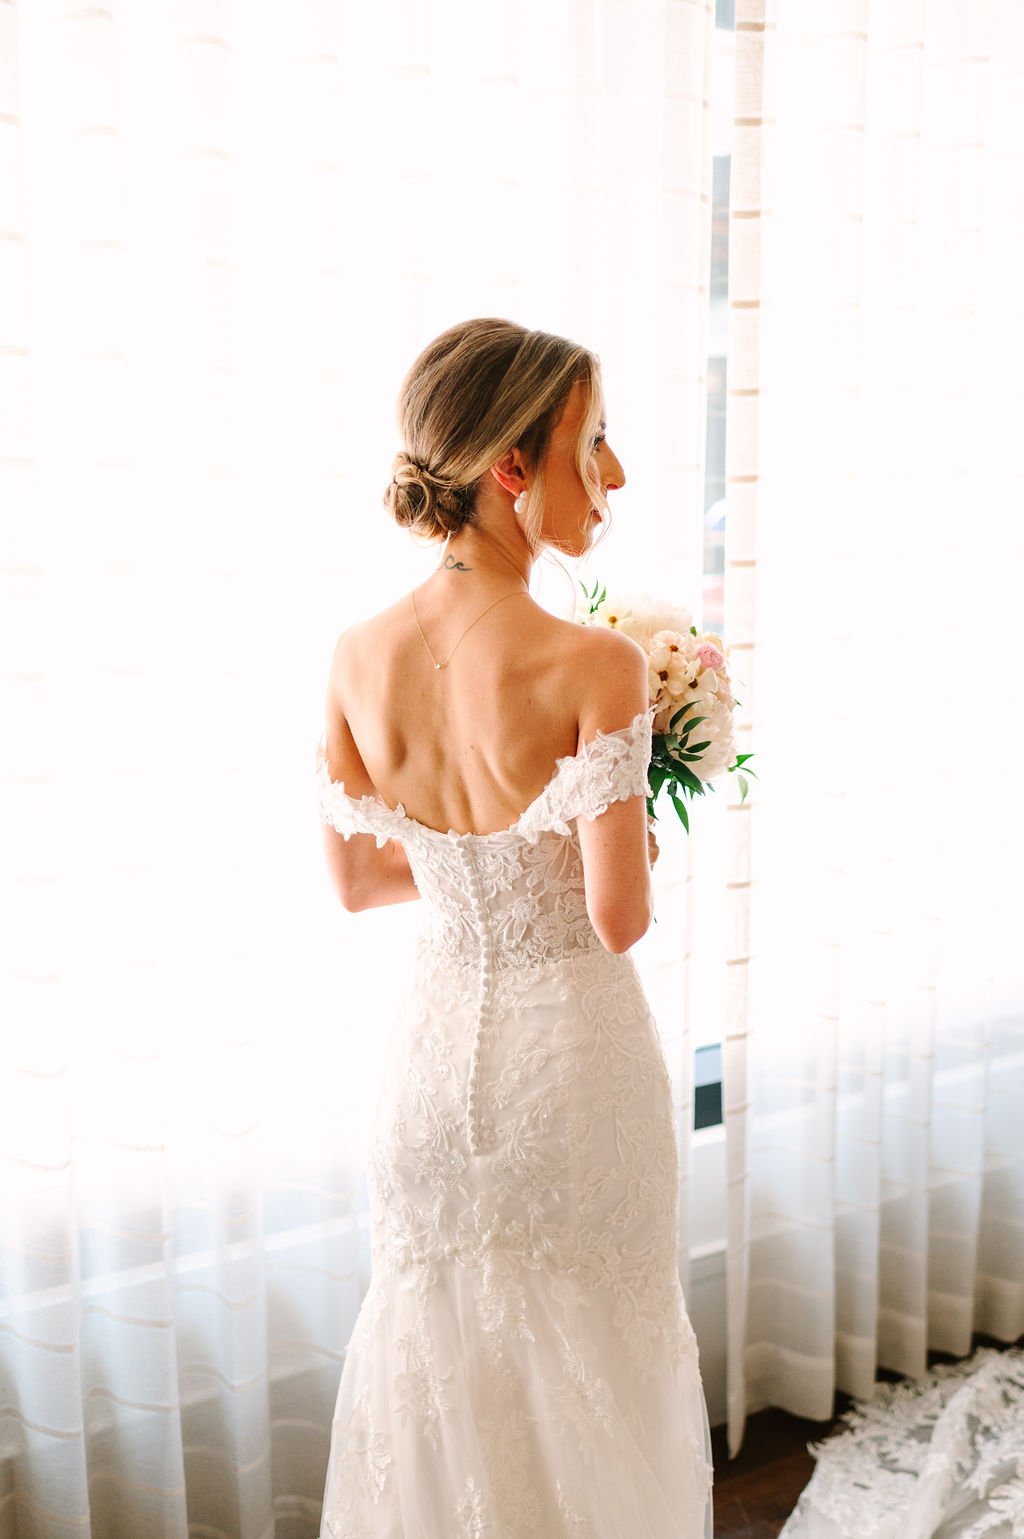 ivory-and-beau-bride-hayley-in-katell-by-maggie-sottero-a-clasic-fitted-lace-wedding-dress-with-sweetheart-neckline-purchased-from-savannah-bridal-shop-ivory-and-beau-9.jpg